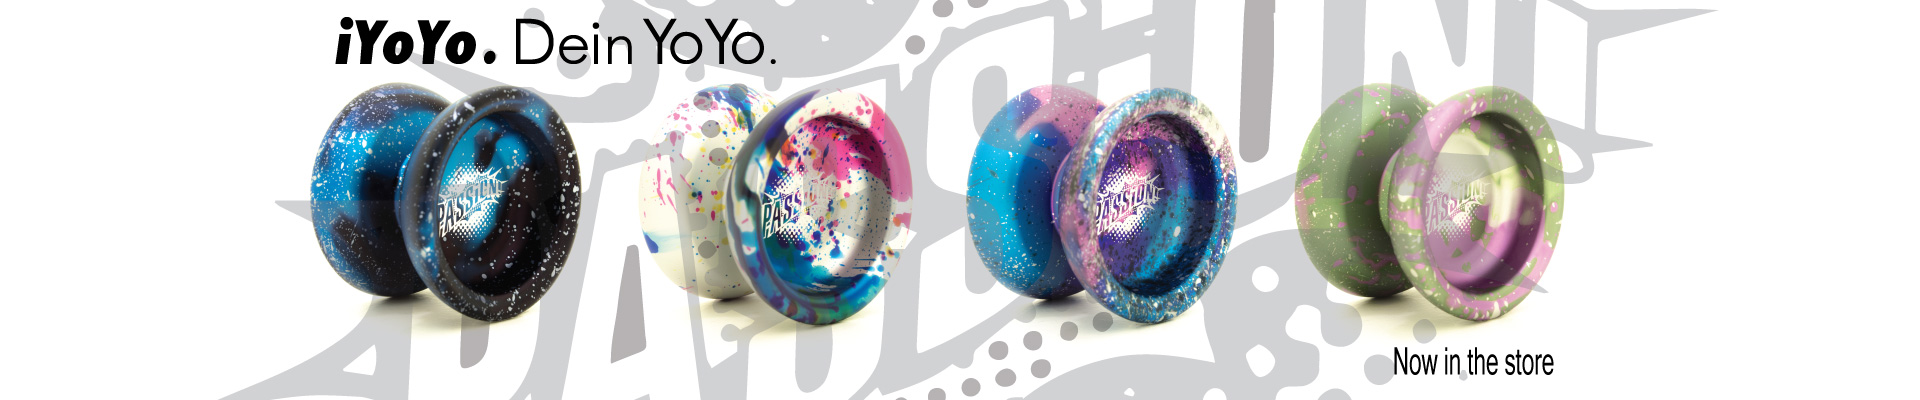 The iYoYo PASSiON is now in the store